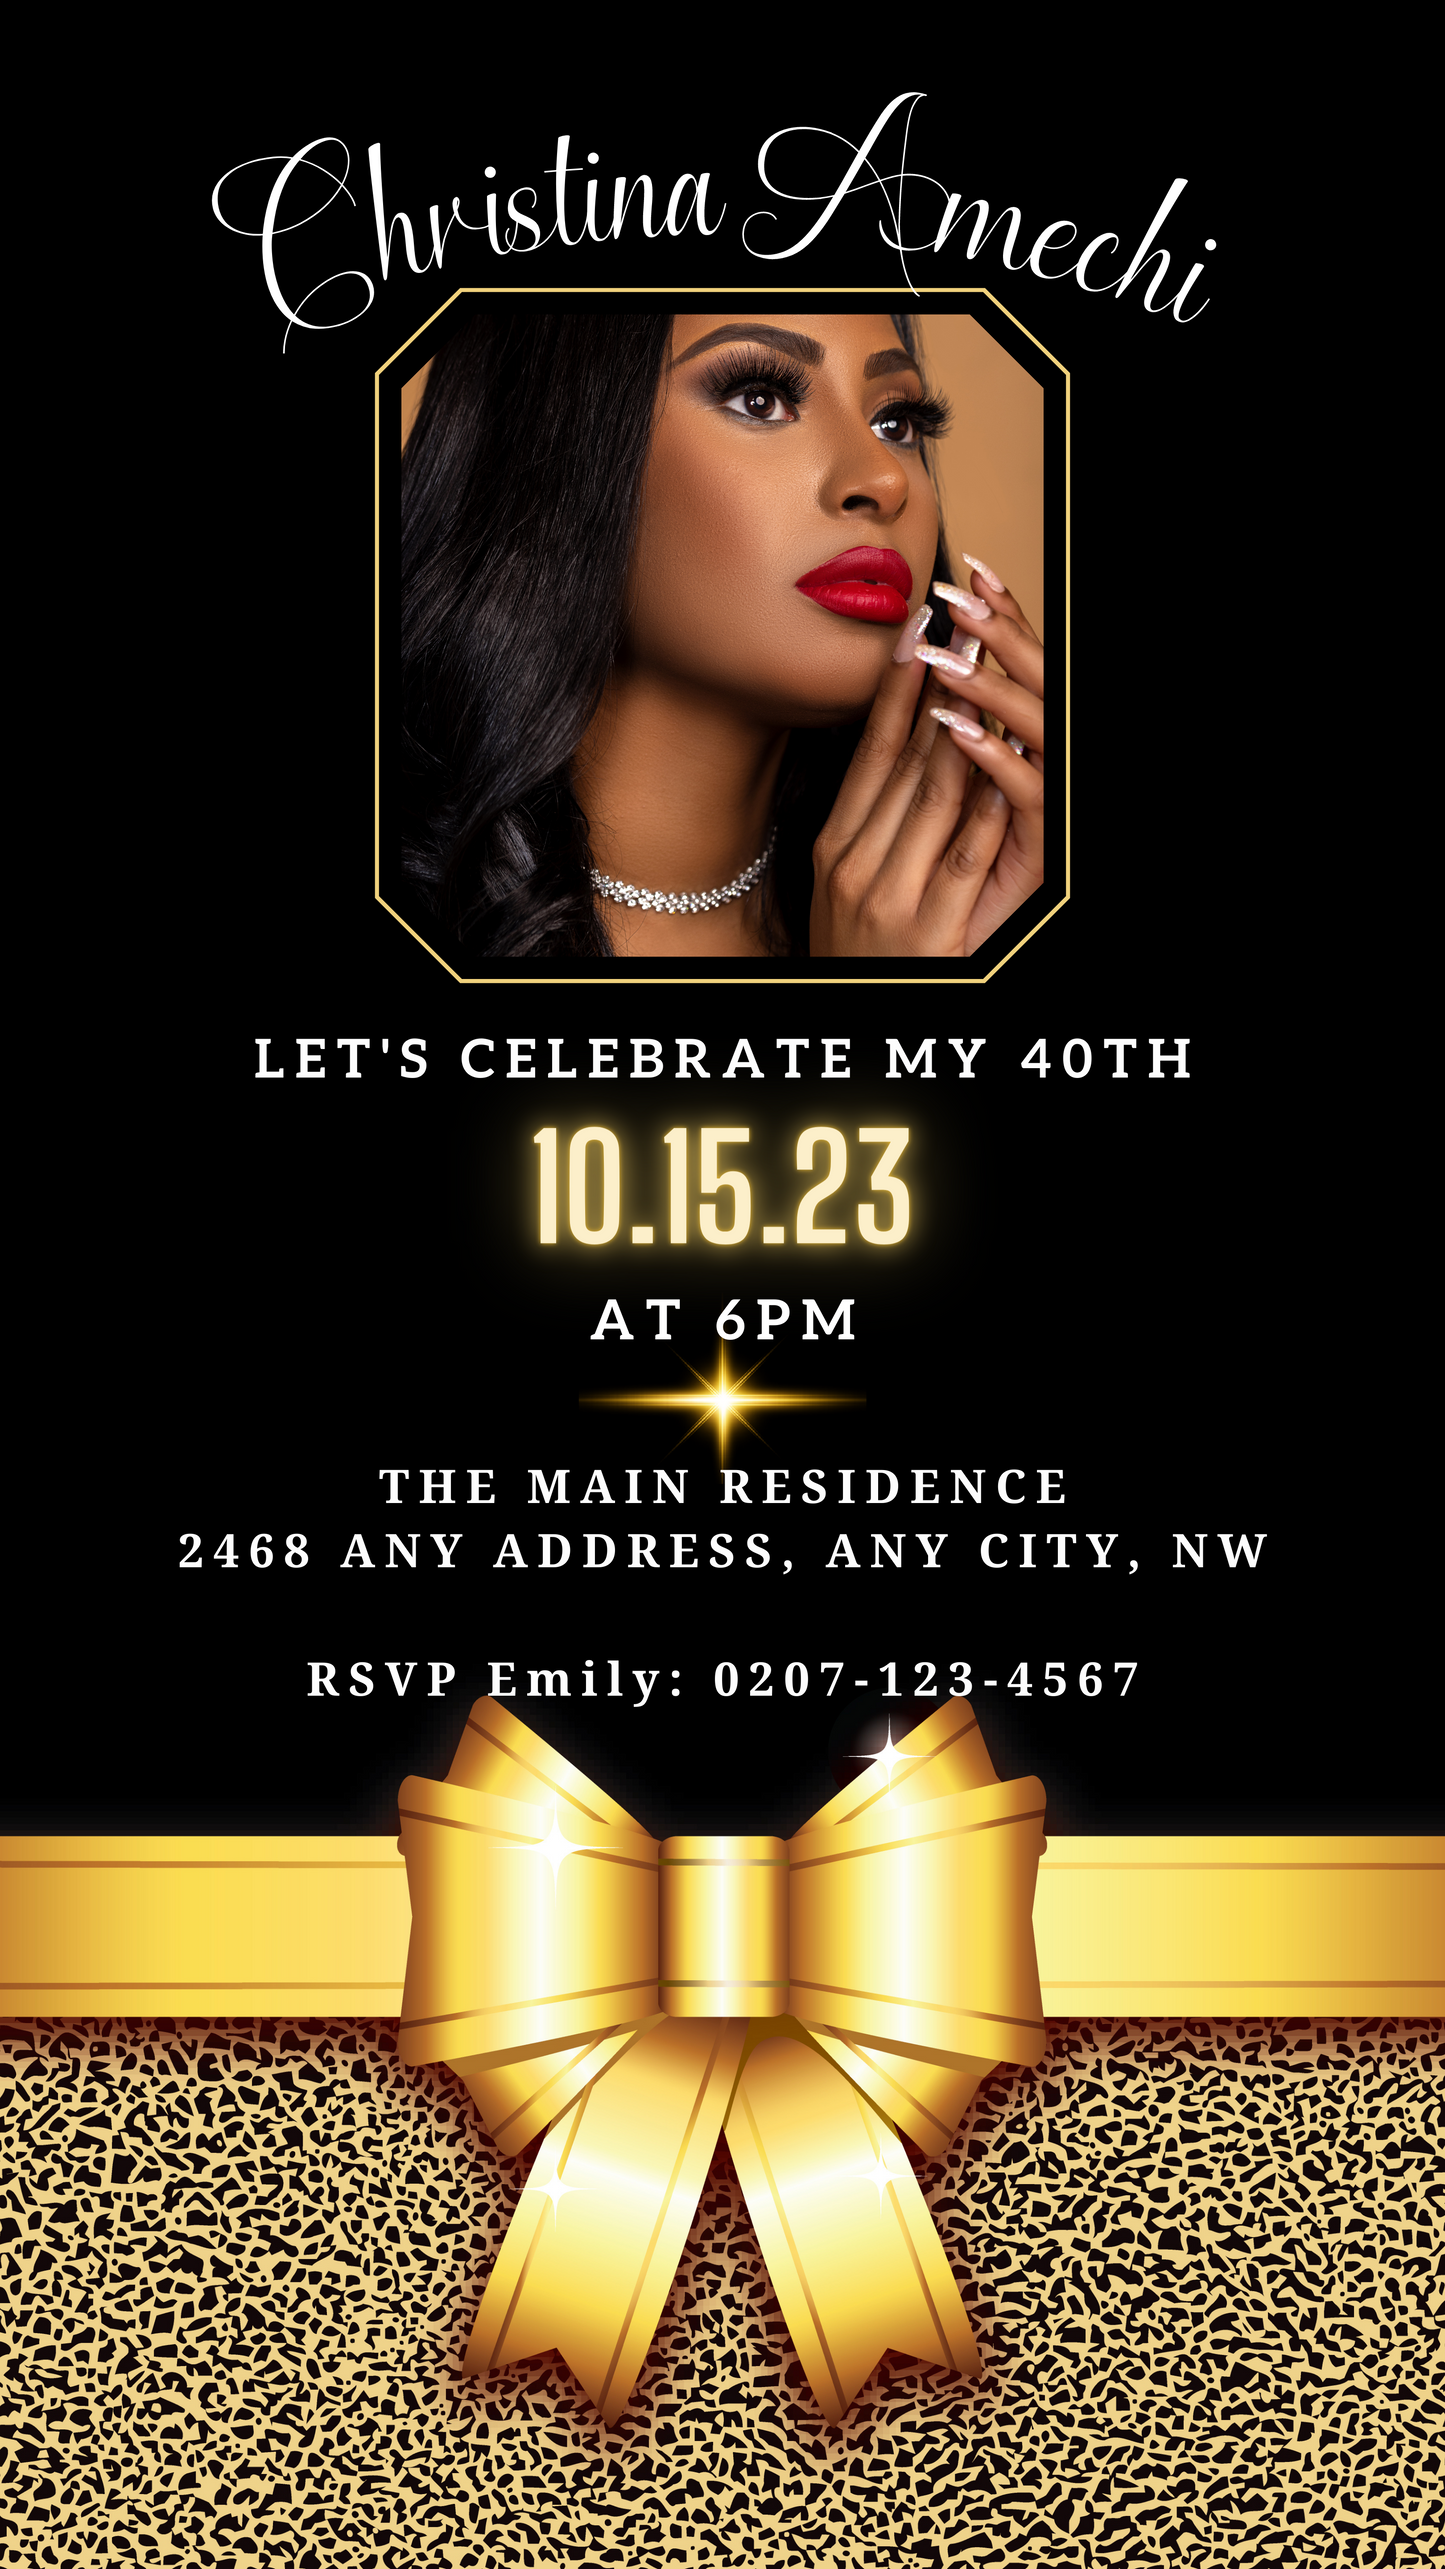 Black and gold 40th birthday evite featuring a woman's face, red lips, and a leopard print background with customizable text via Canva.